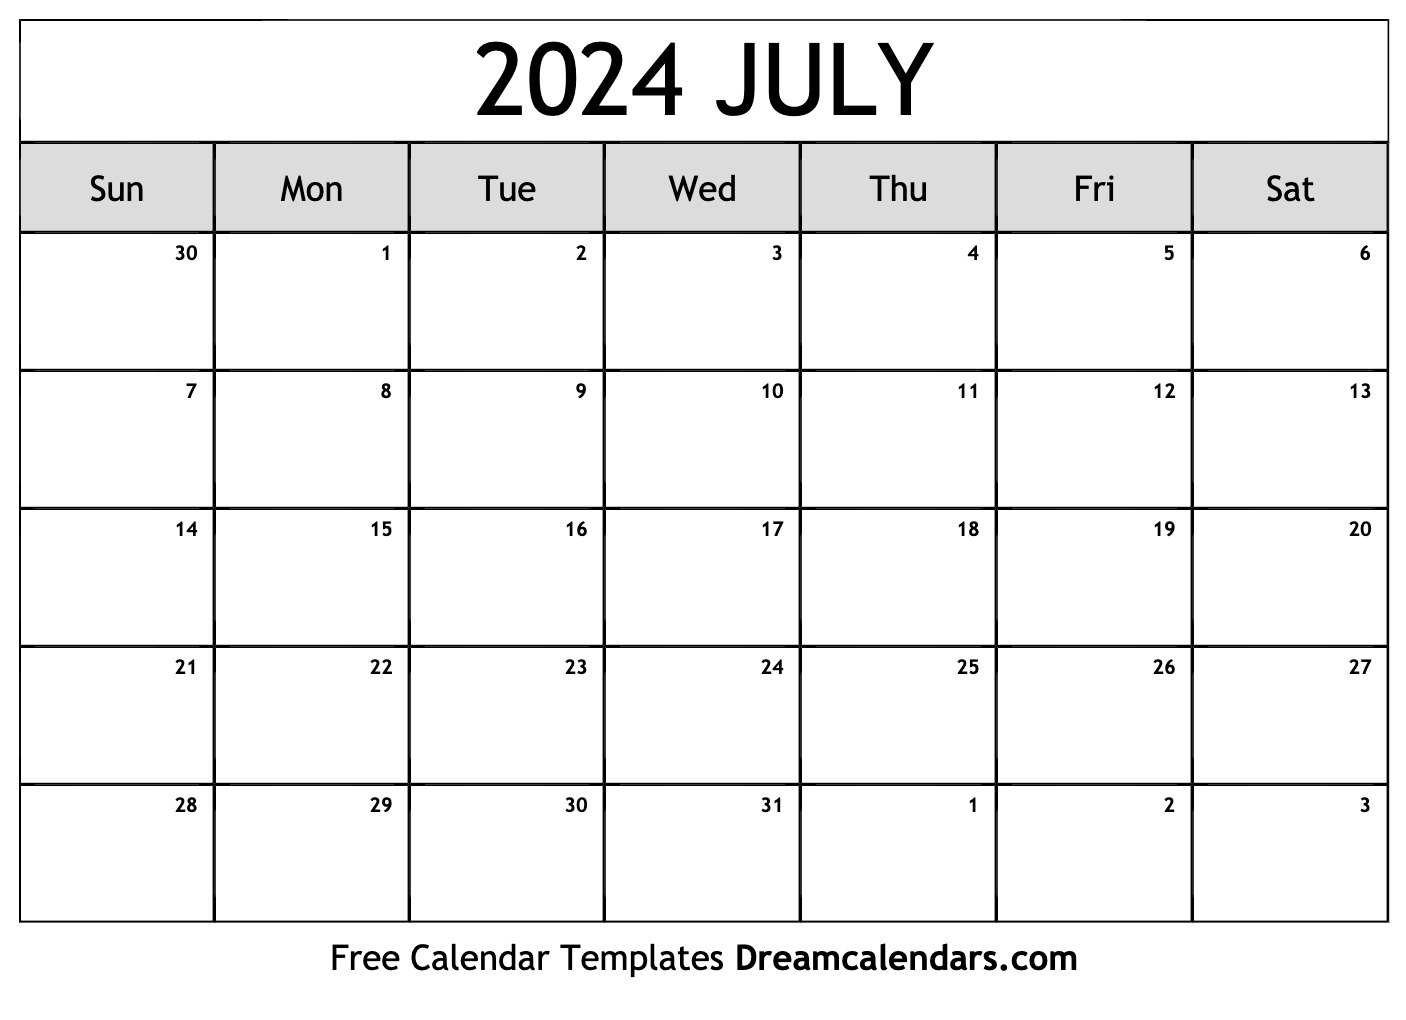 July 2024 Calendar - Free Printable With Holidays And Observances | July 2024 Calendar Printable Word